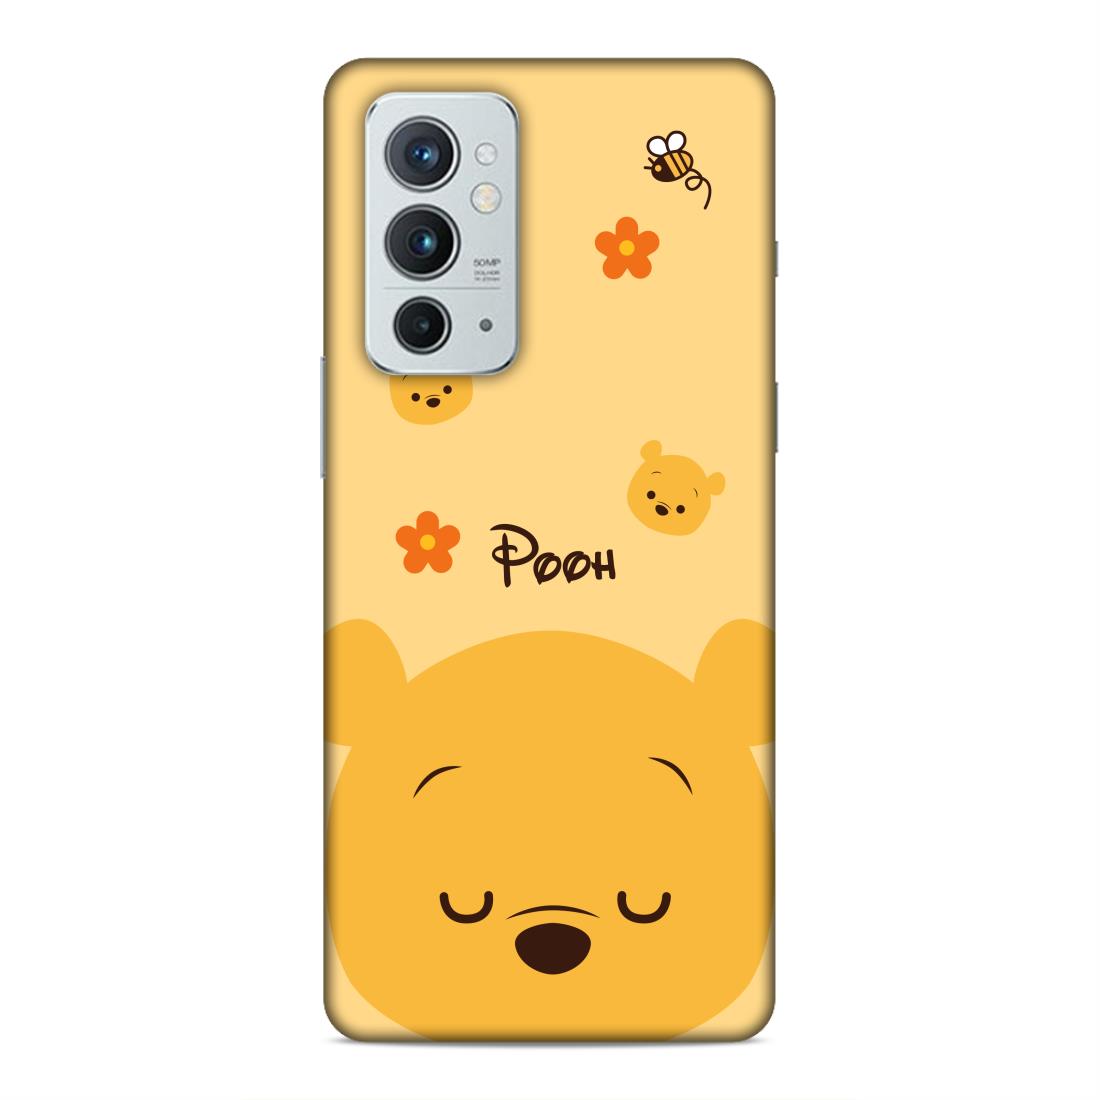 Pooh Cartton Hard Back Case For OnePlus 9 RT 5G